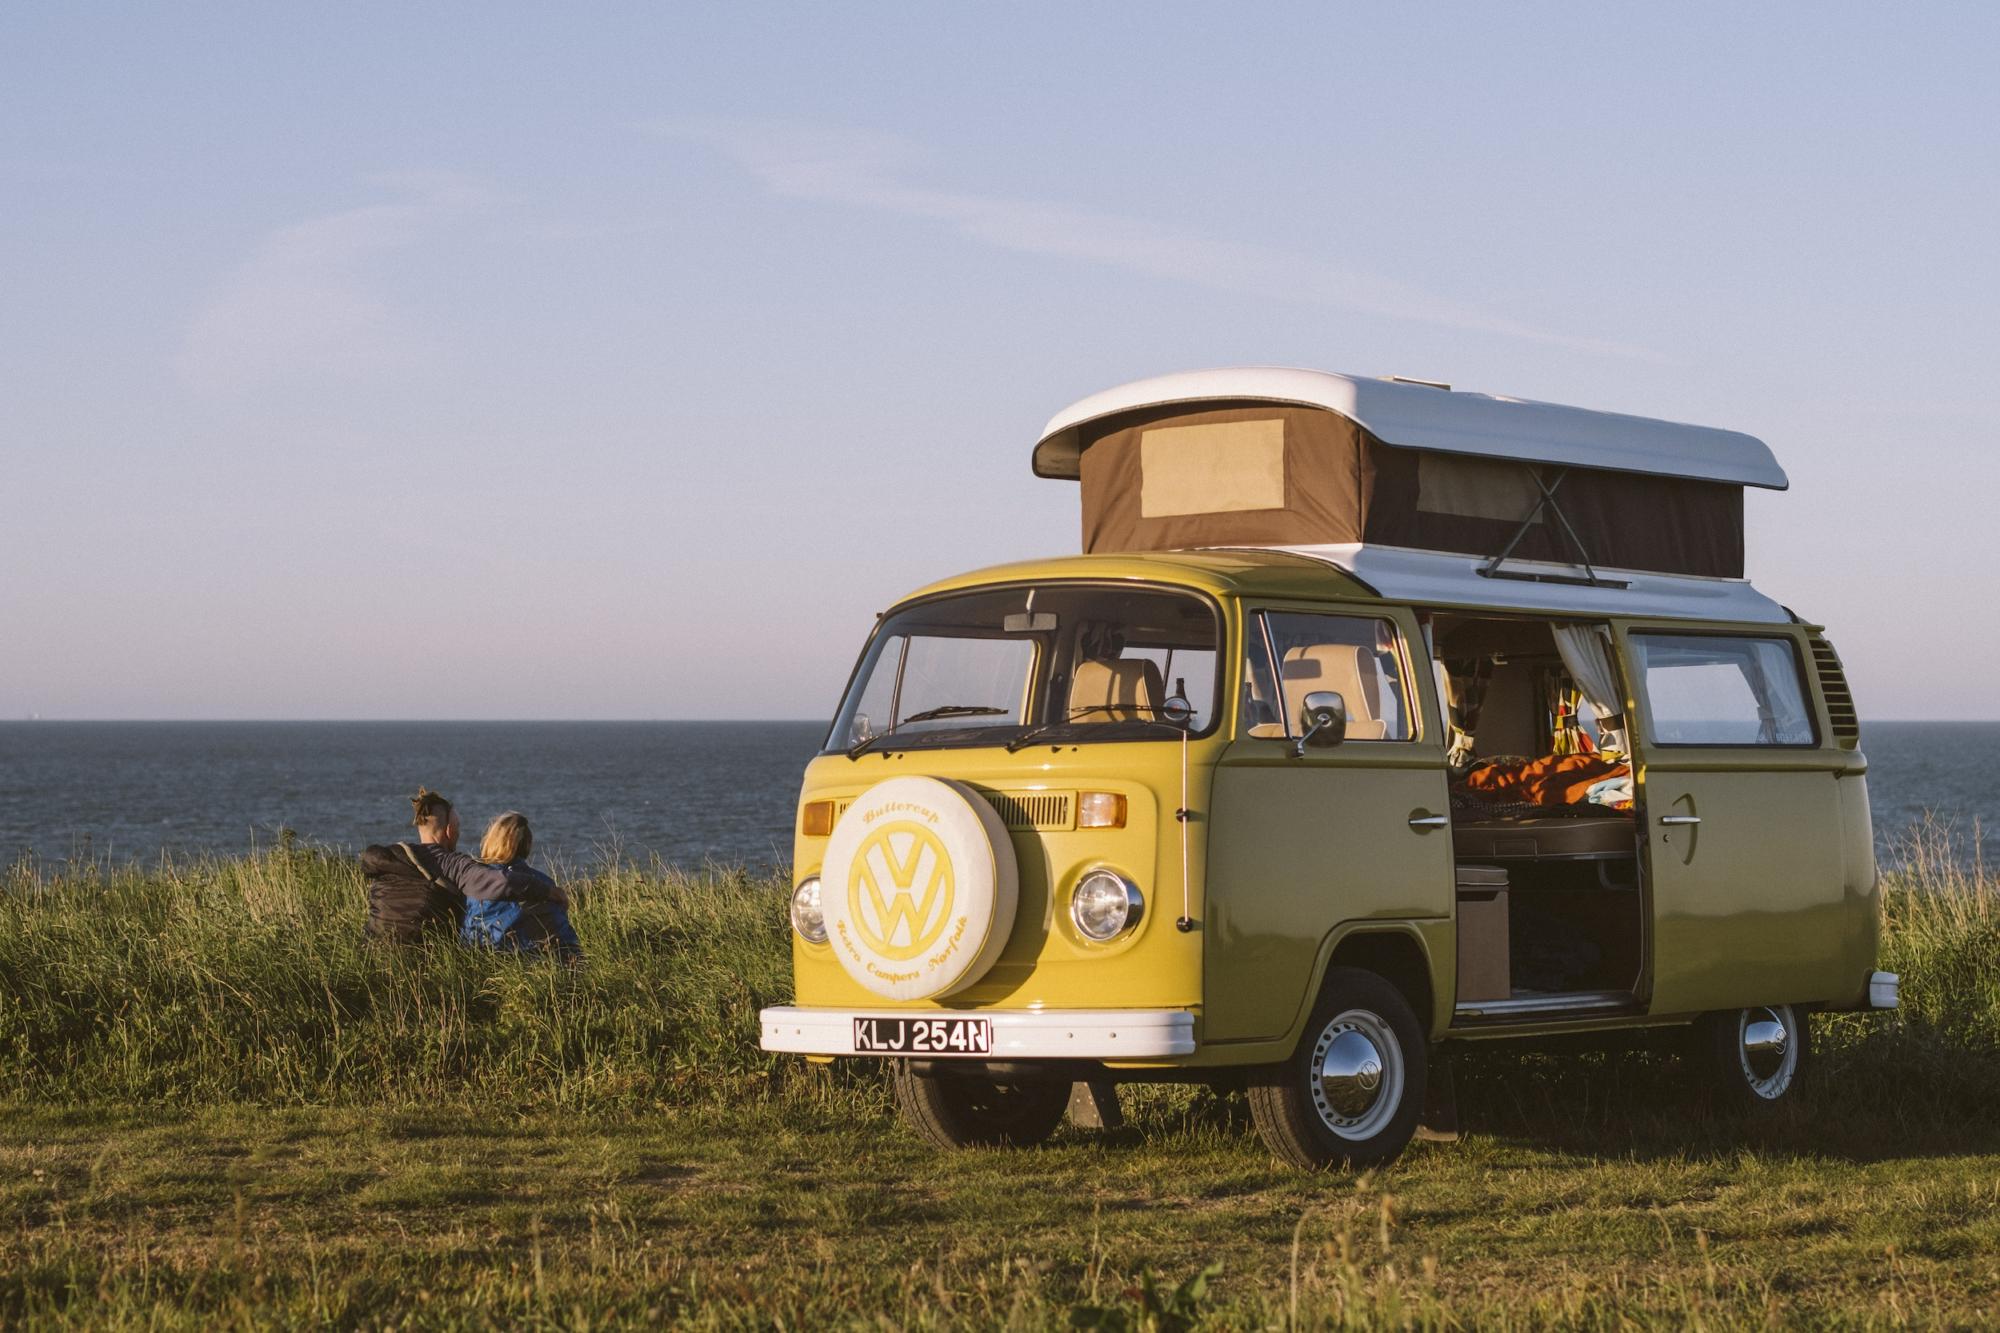 Is it possible to find a pub stopover for motorhome easily?